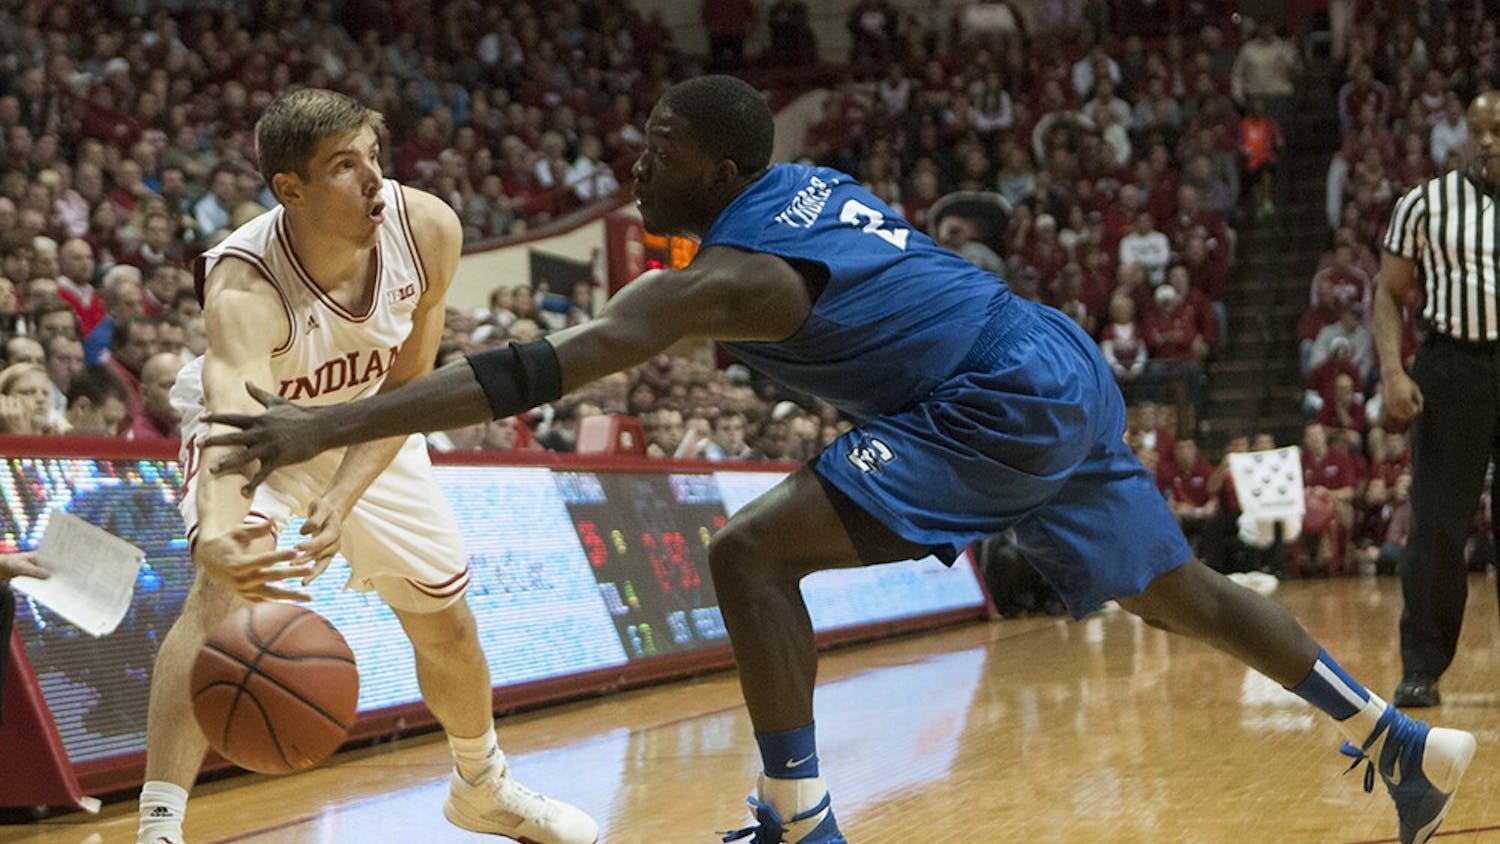 Junior forward Collin Hartman passes the ball during the game against Creighton on Thursday at Assembly Hall.